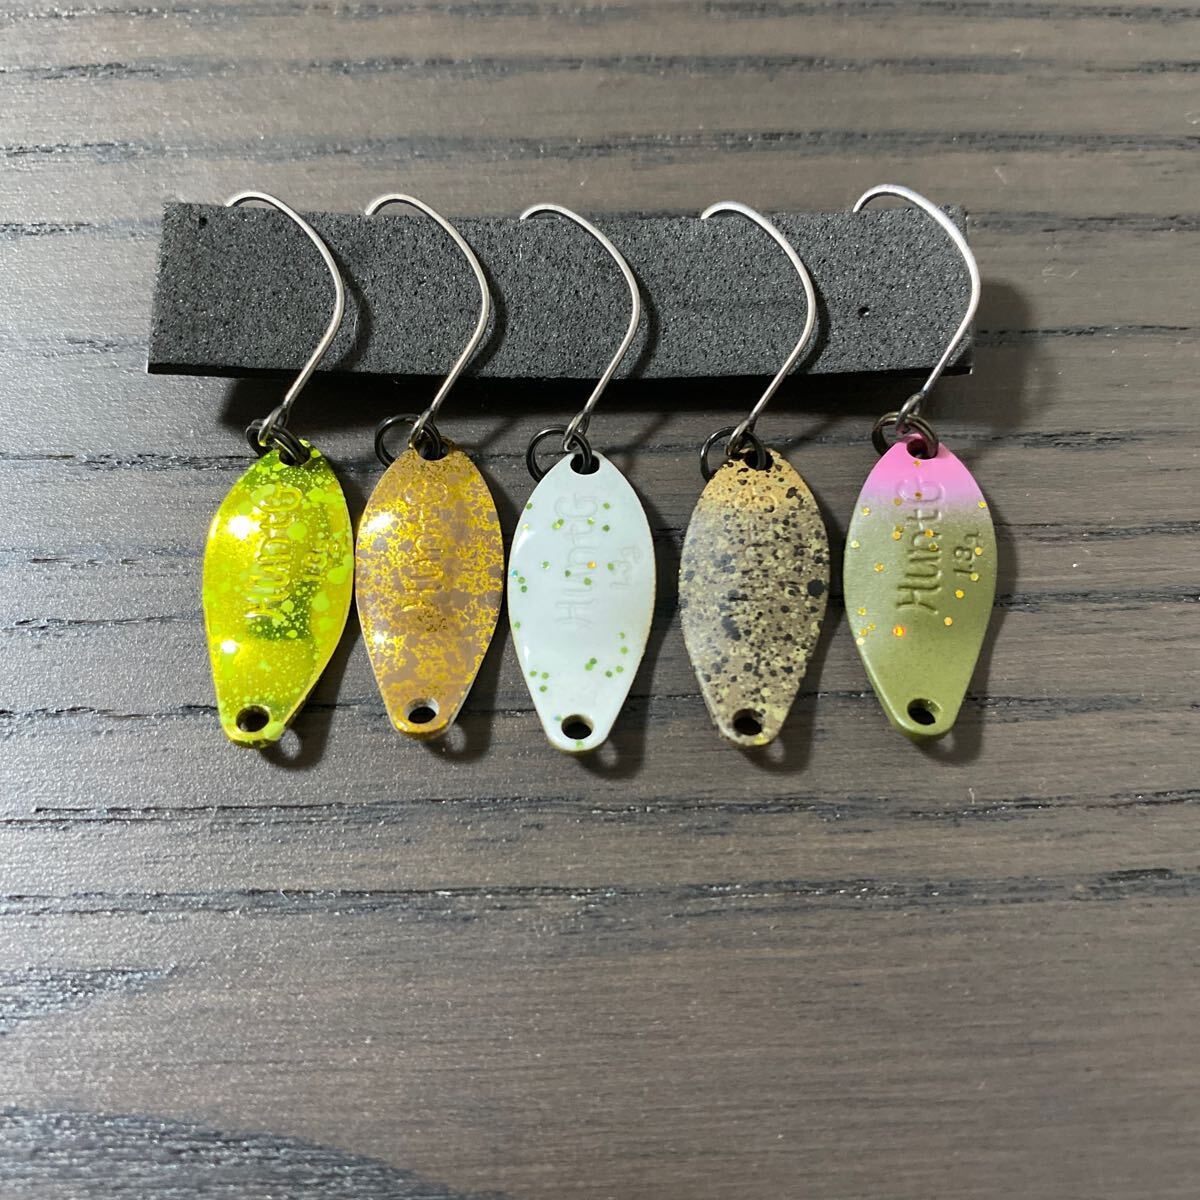  new do lower handle to grande 1.3g 5 pieces set NewDrawer Hunt Grande HuntG Area trout control fishing place micro spoon 